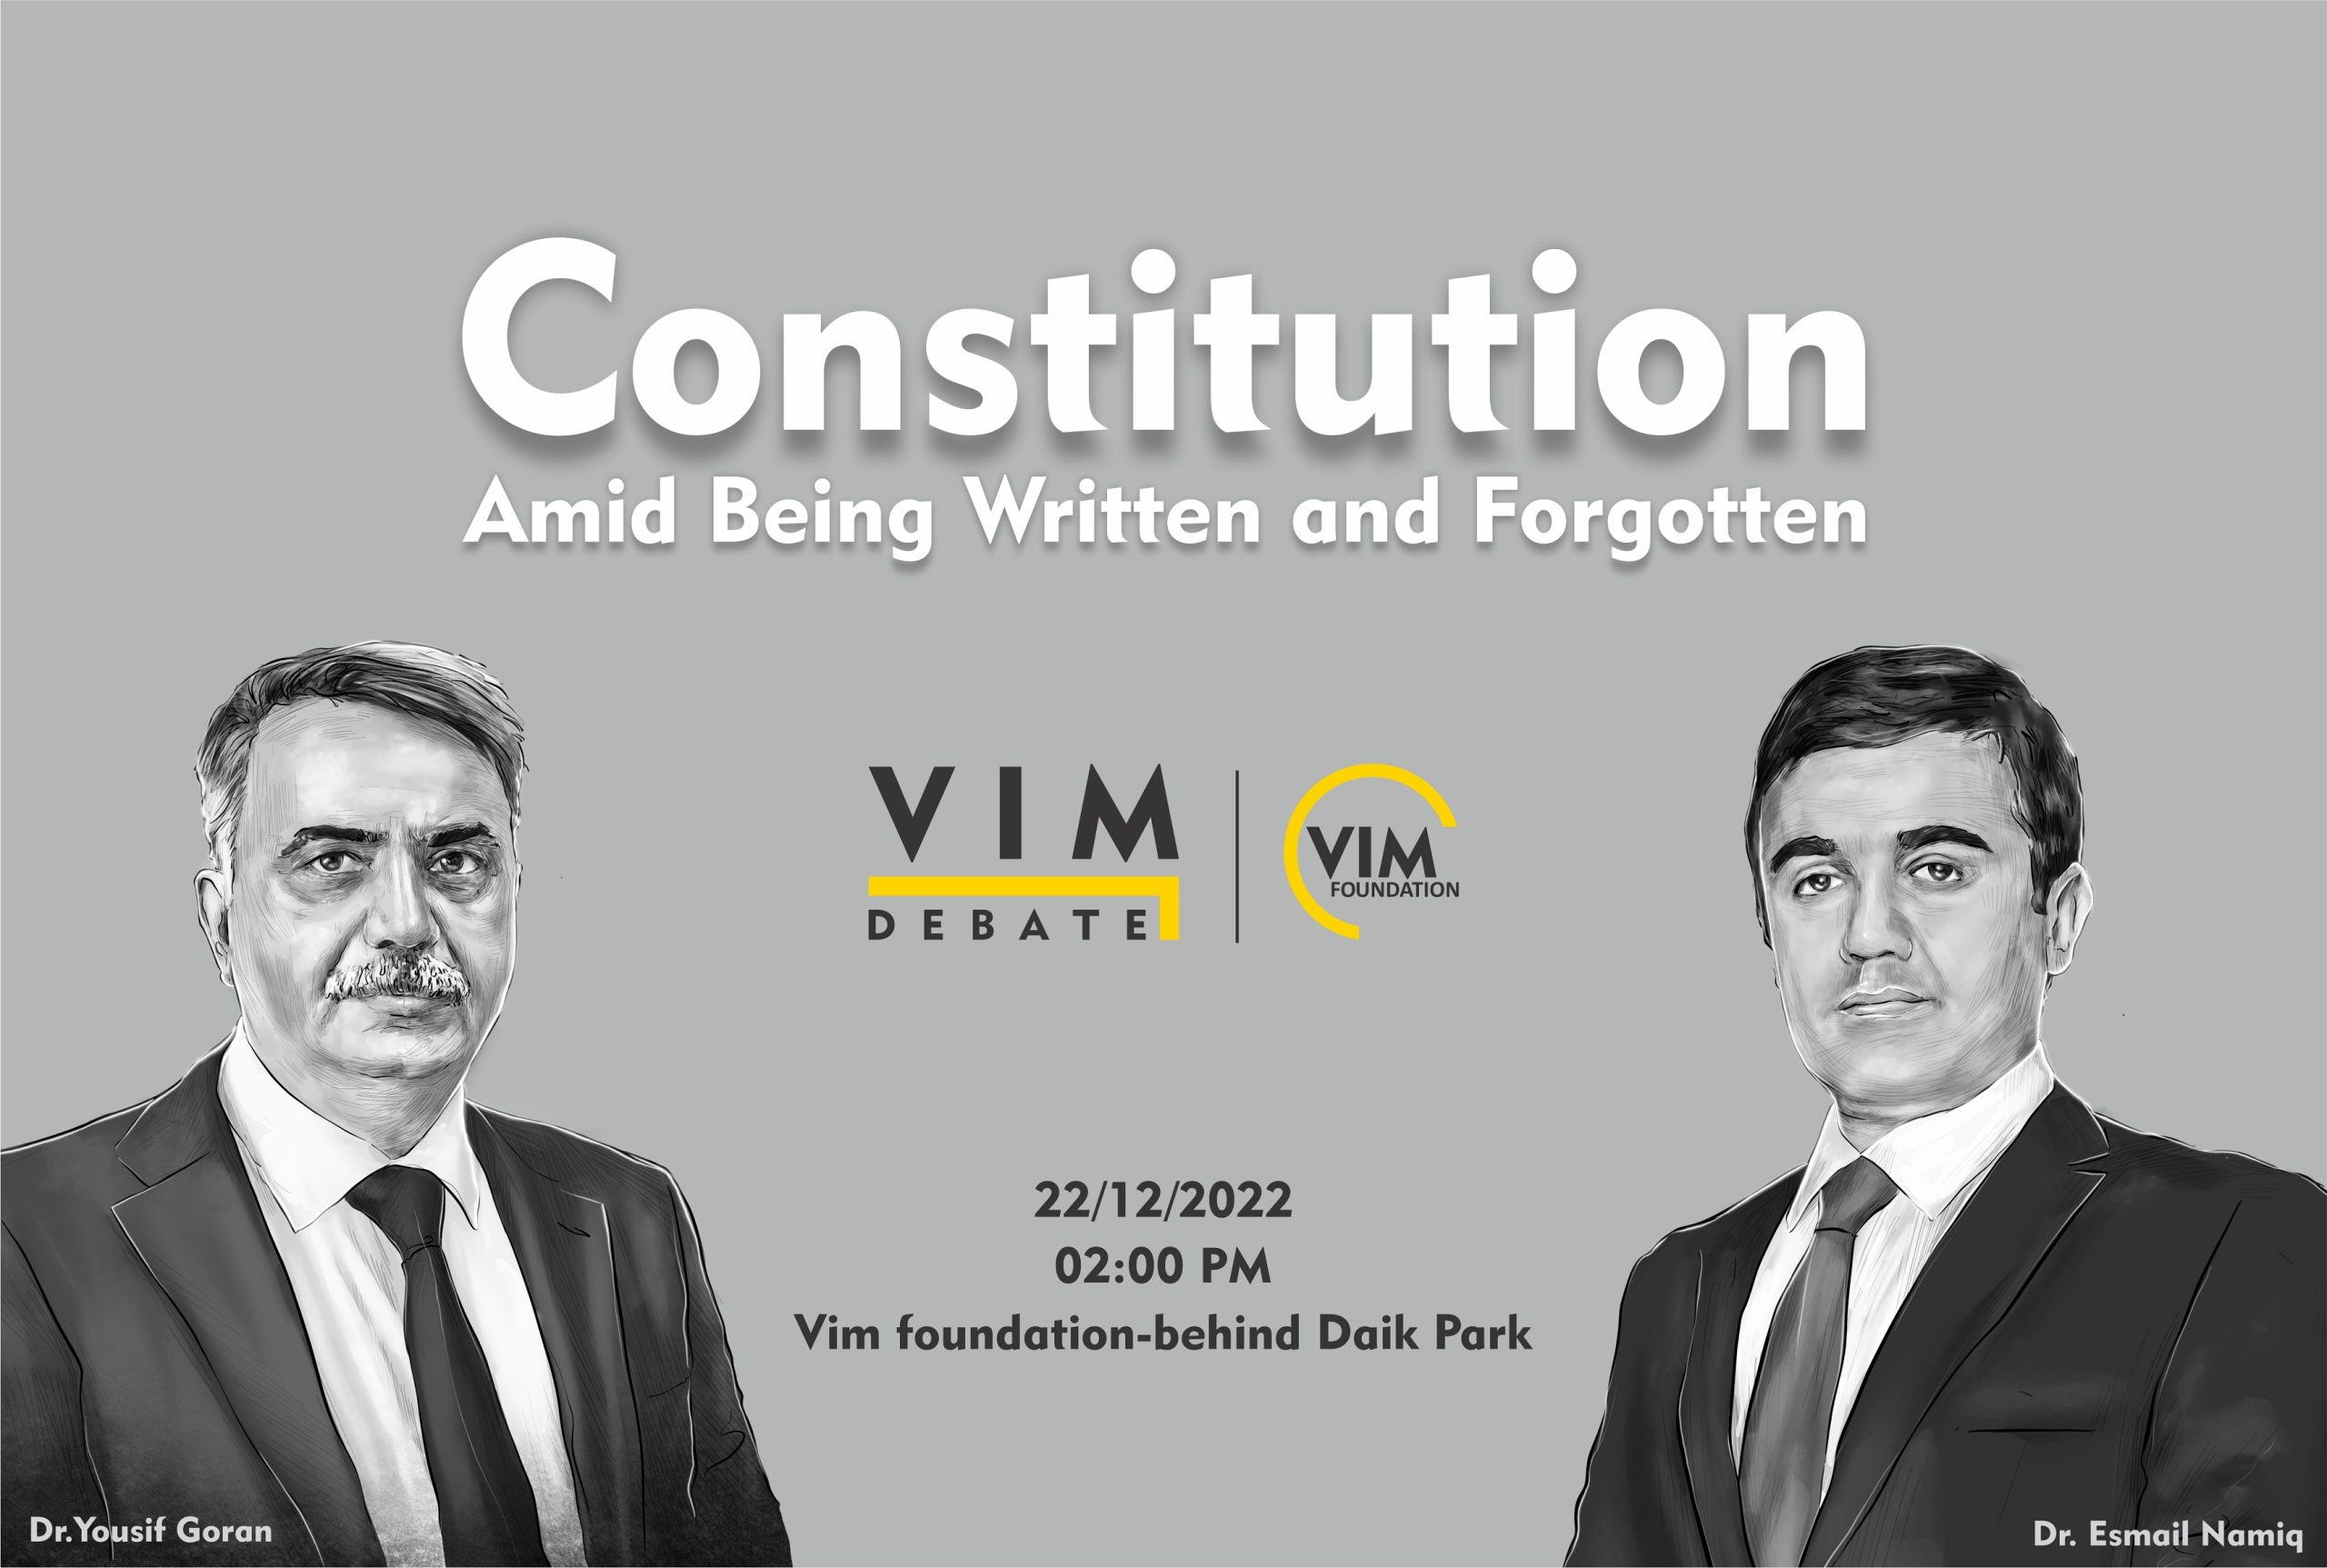 Vim Foundations presents Constitution; Amid Being Written and Forgotten debate.